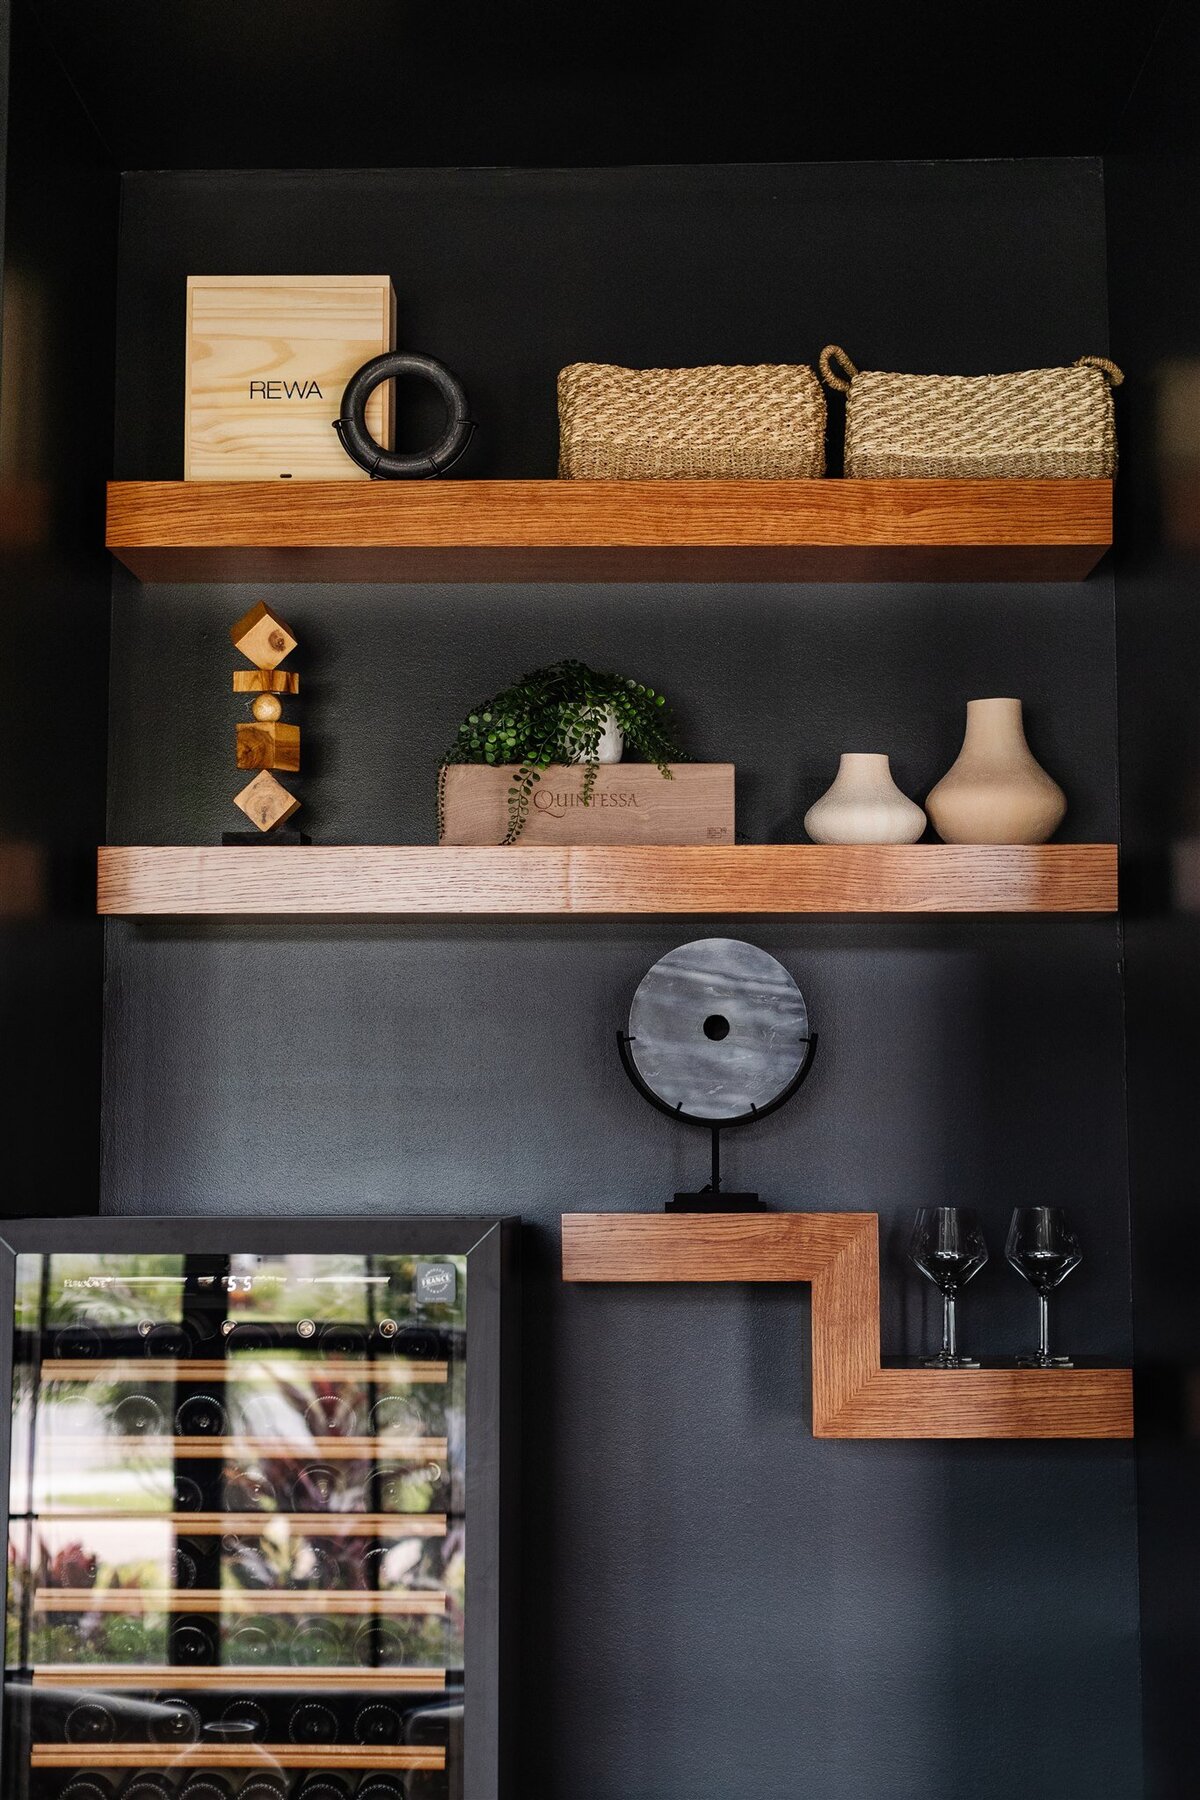 Wooden shelves with accents on black wall above wine cellar